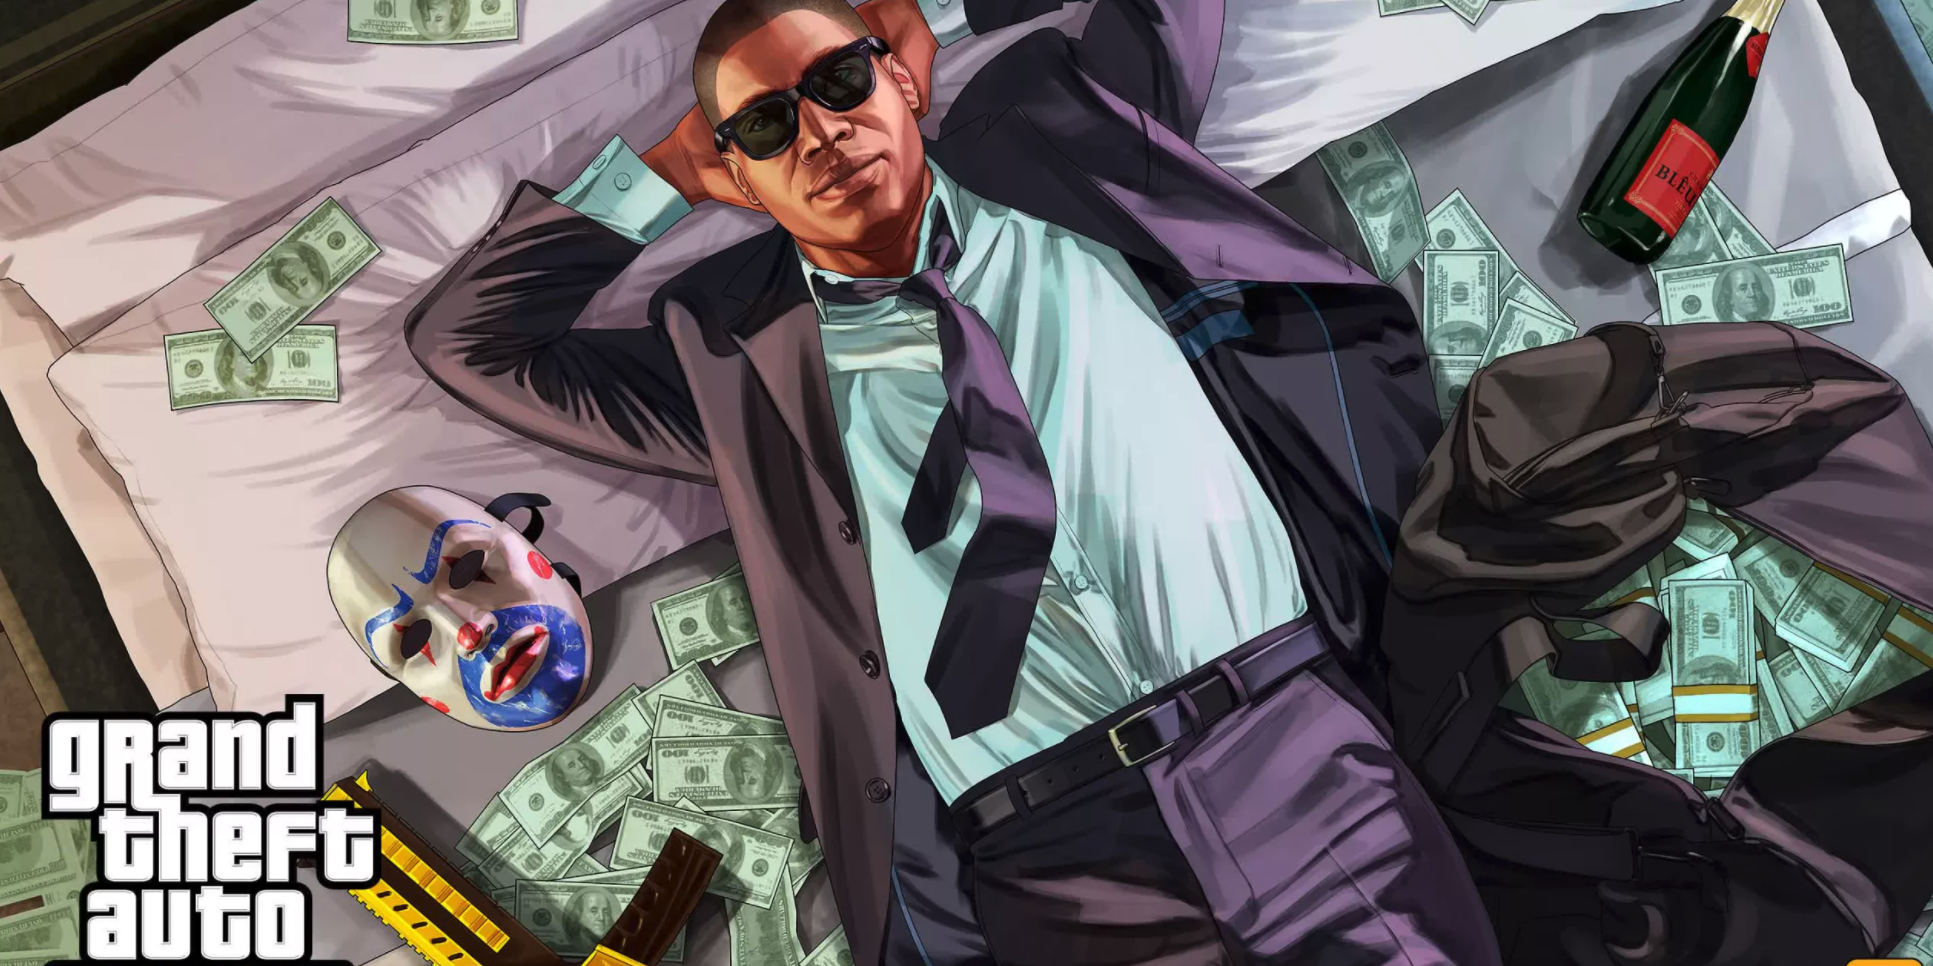 A character from Grand Theft Auto Online laying on a bed covered in money.